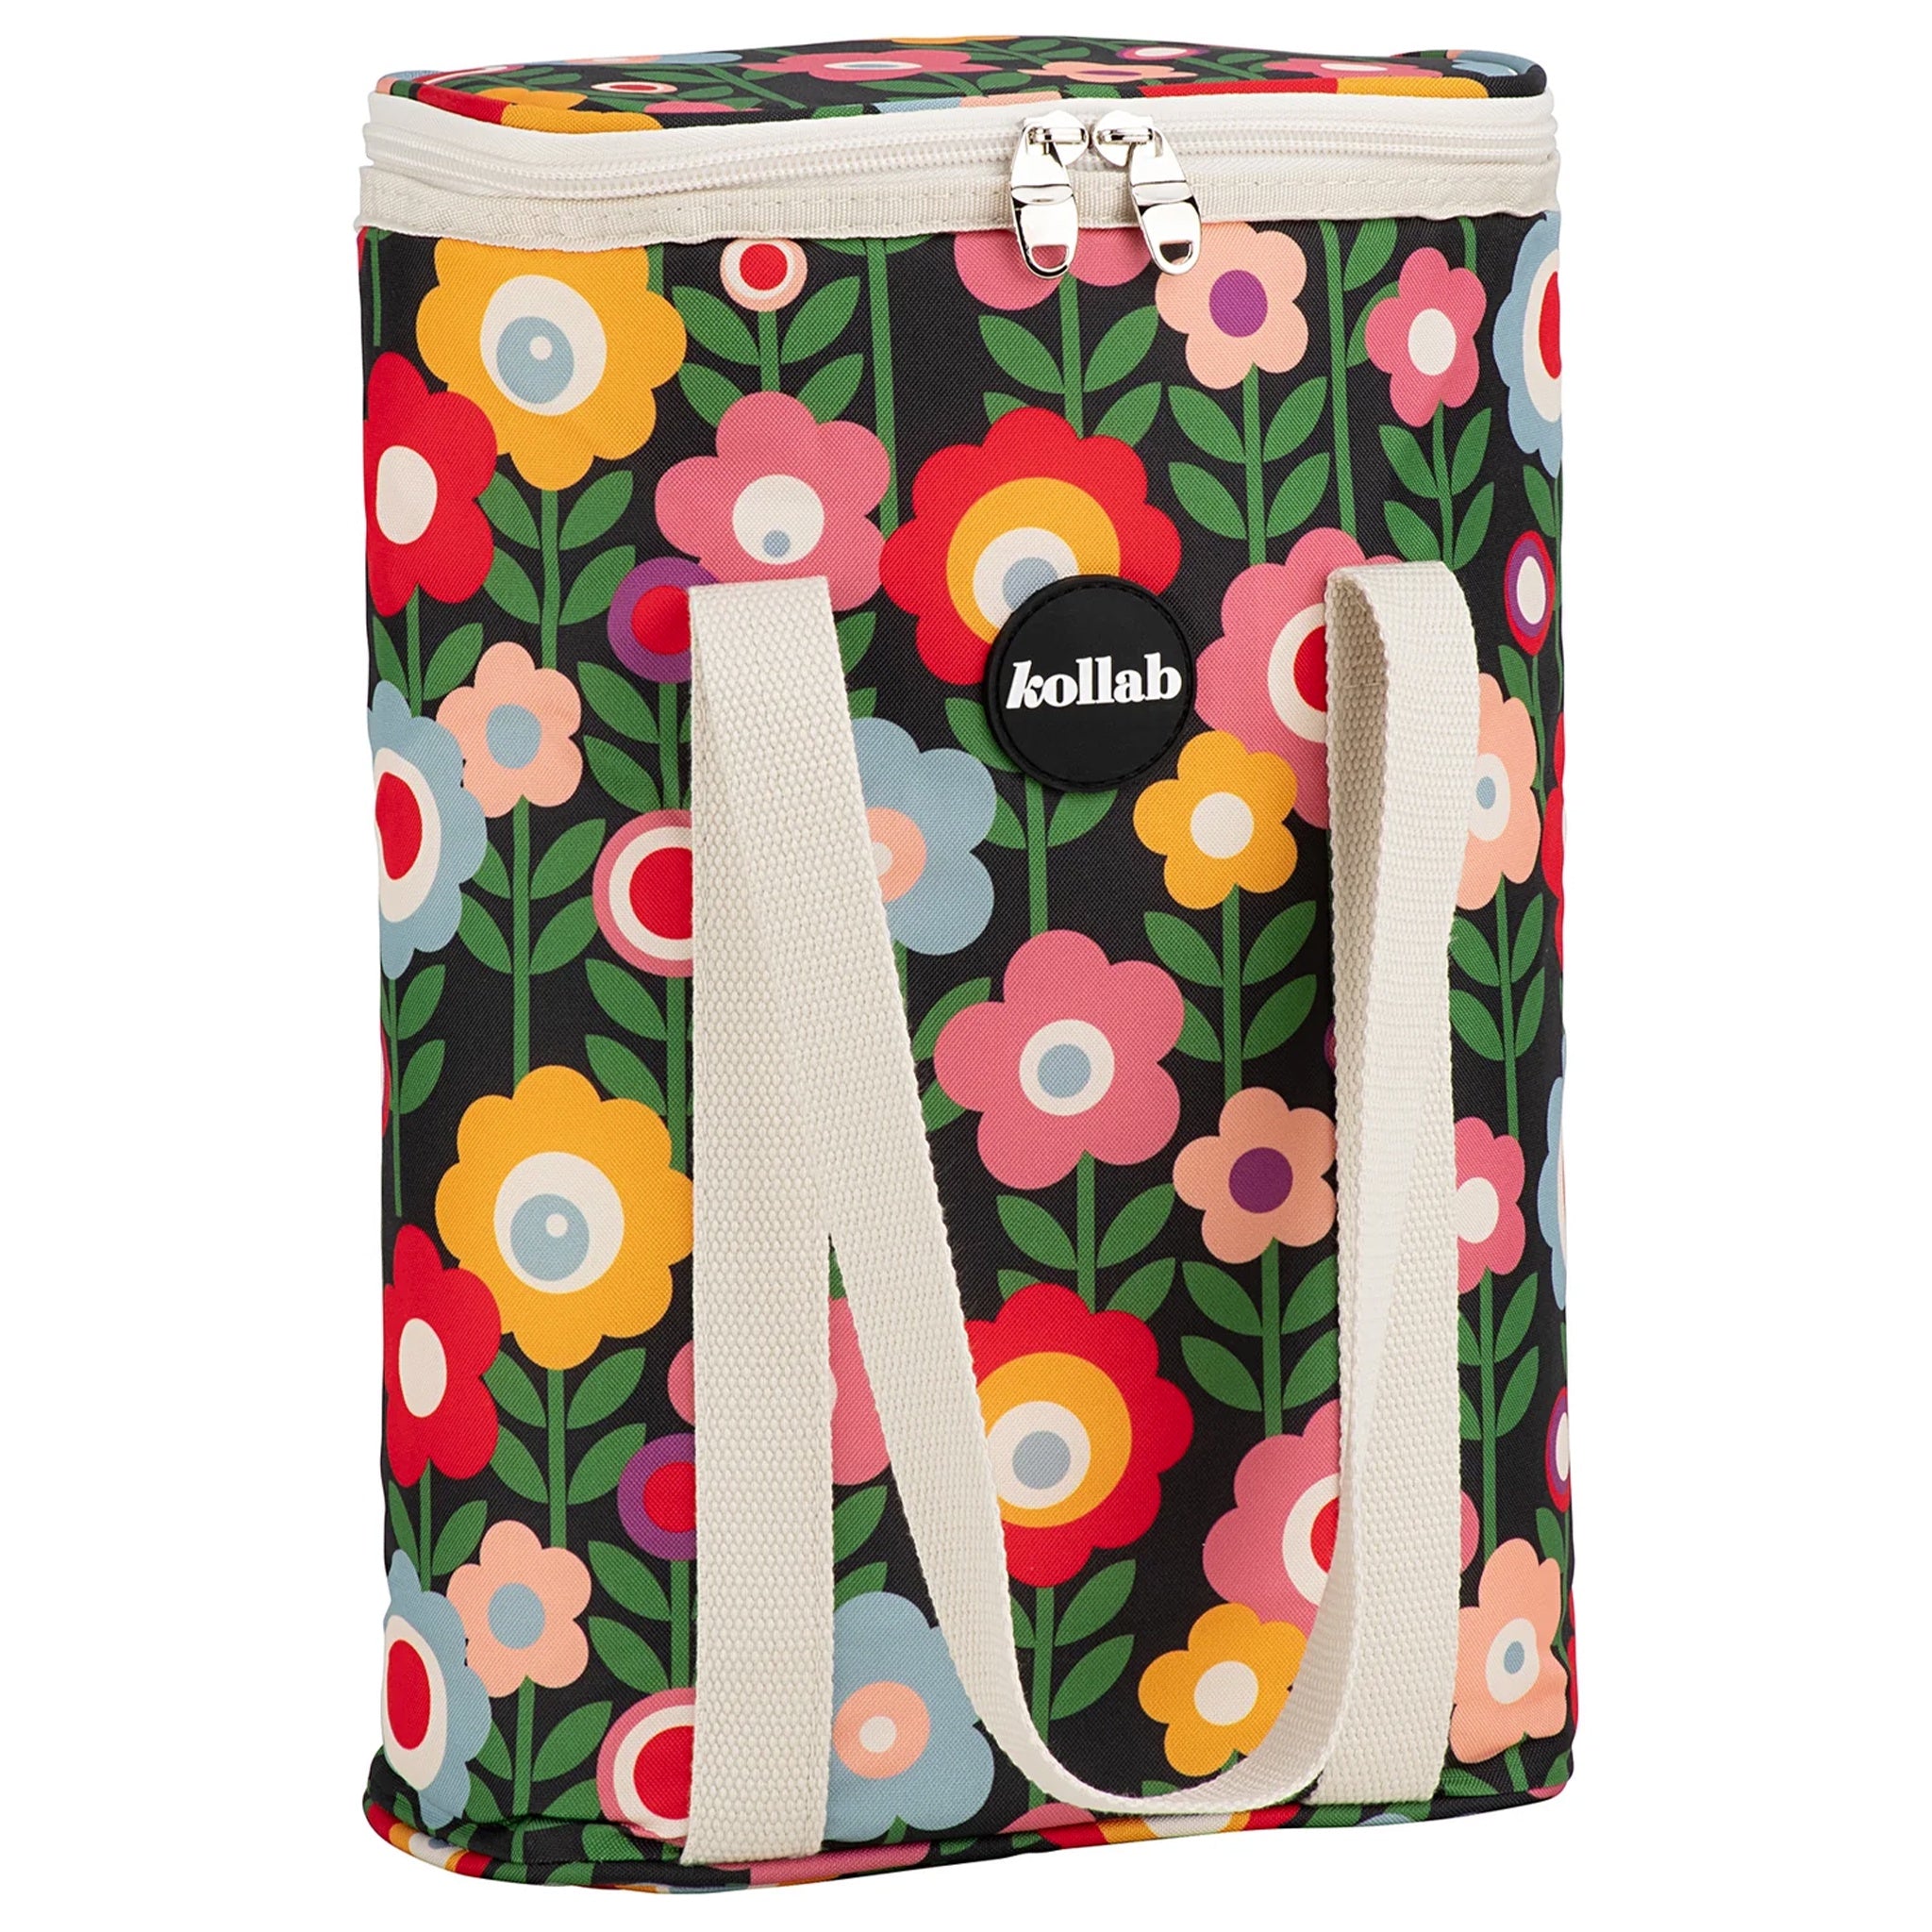 Kollab Insulated Wine Cooler - Marguerite